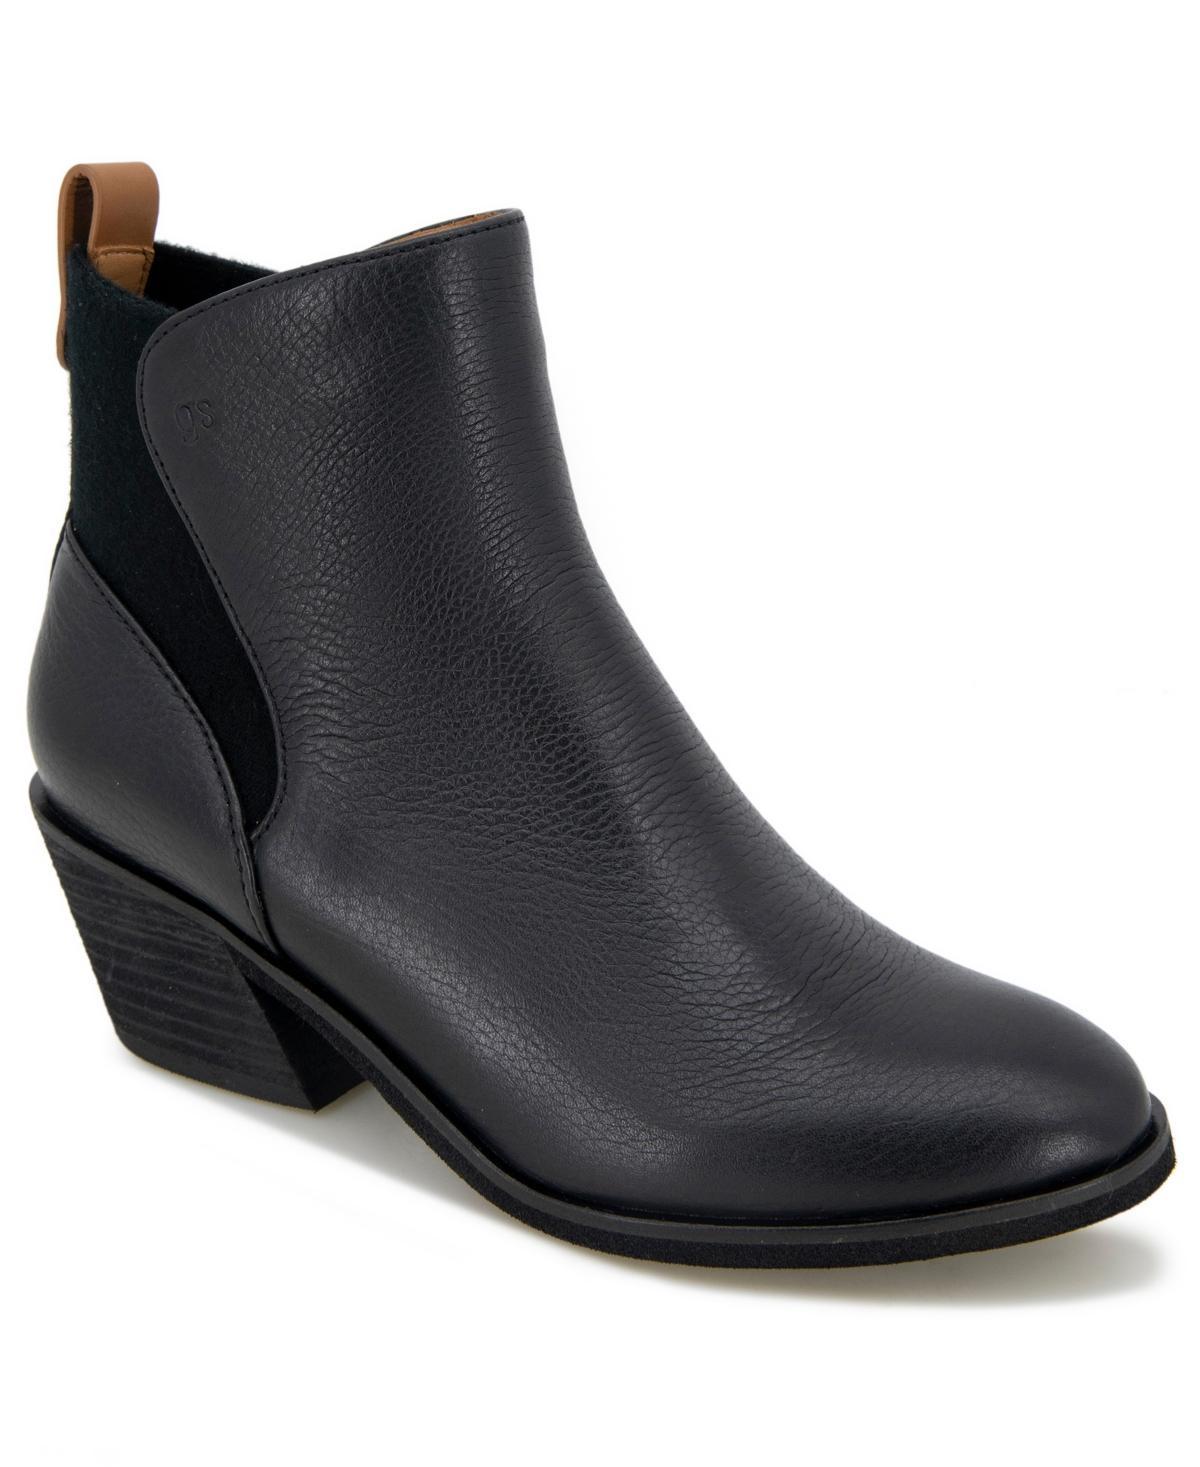 GENTLE SOULS BY KENNETH COLE Clint Western Bootie Product Image